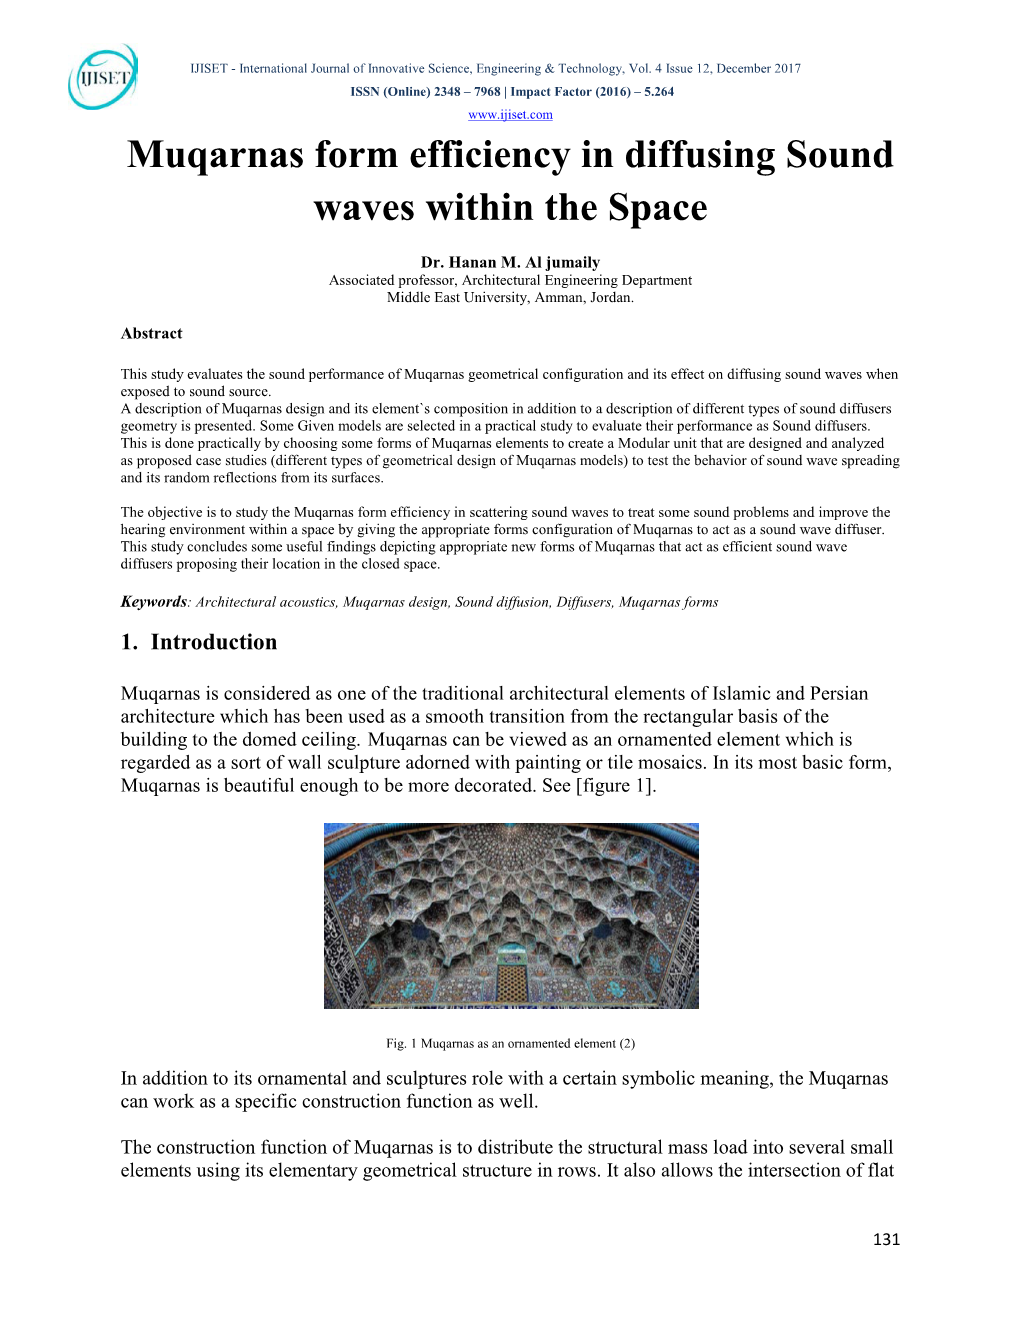 Muqarnas Form Efficiency in Diffusing Sound Waves Within the Space